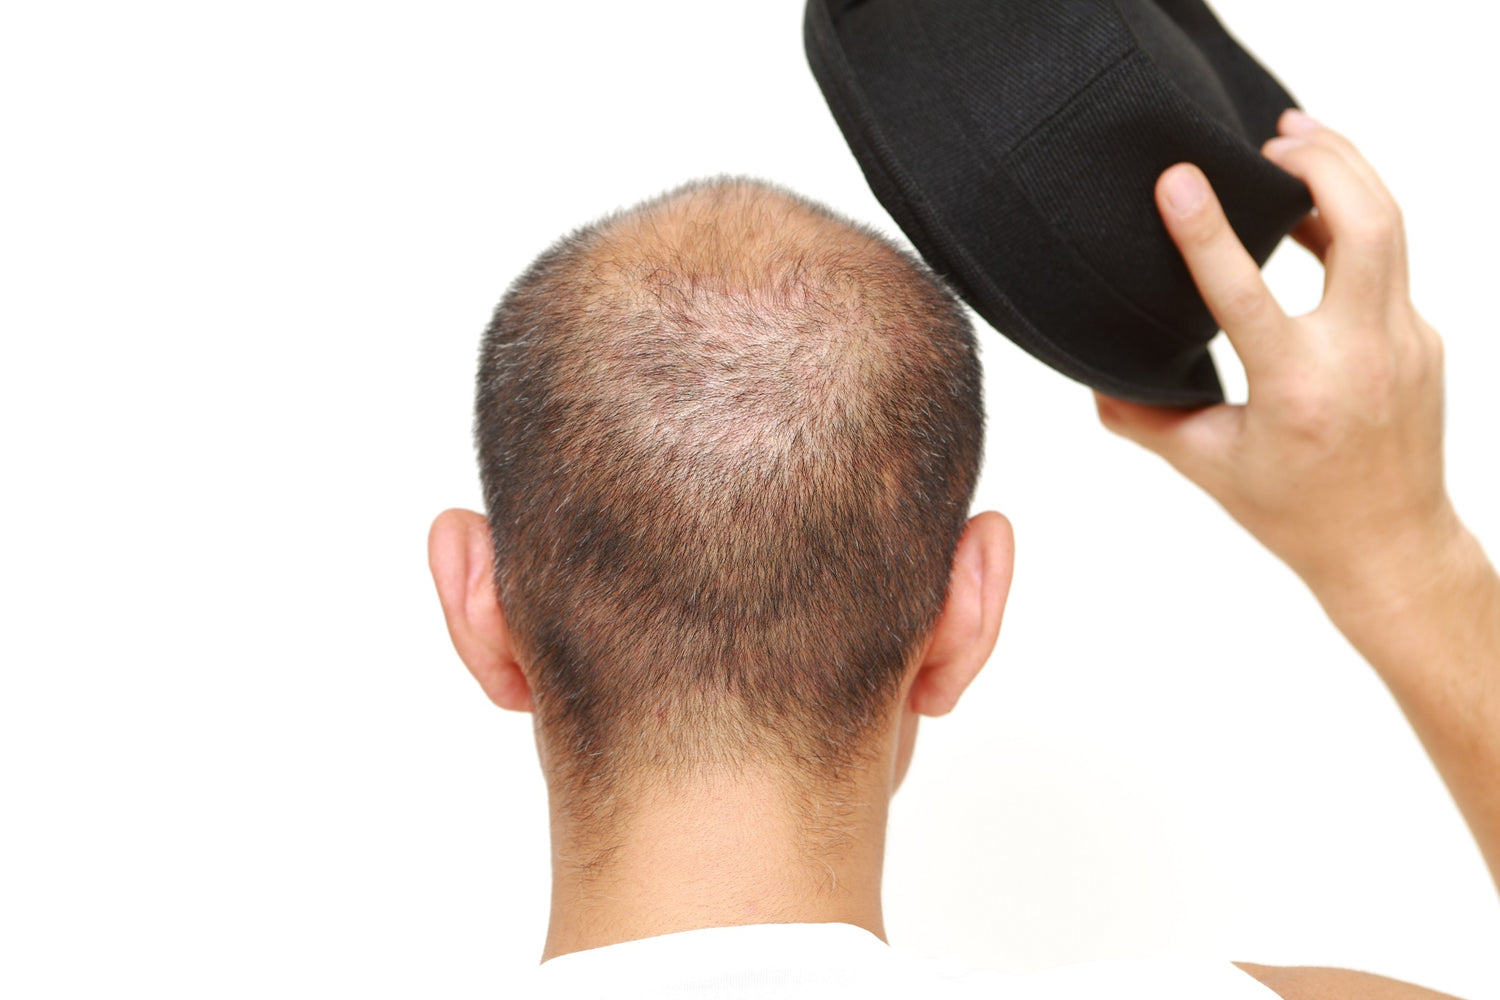 Does Wearing a Hat Make You Lose Hair?